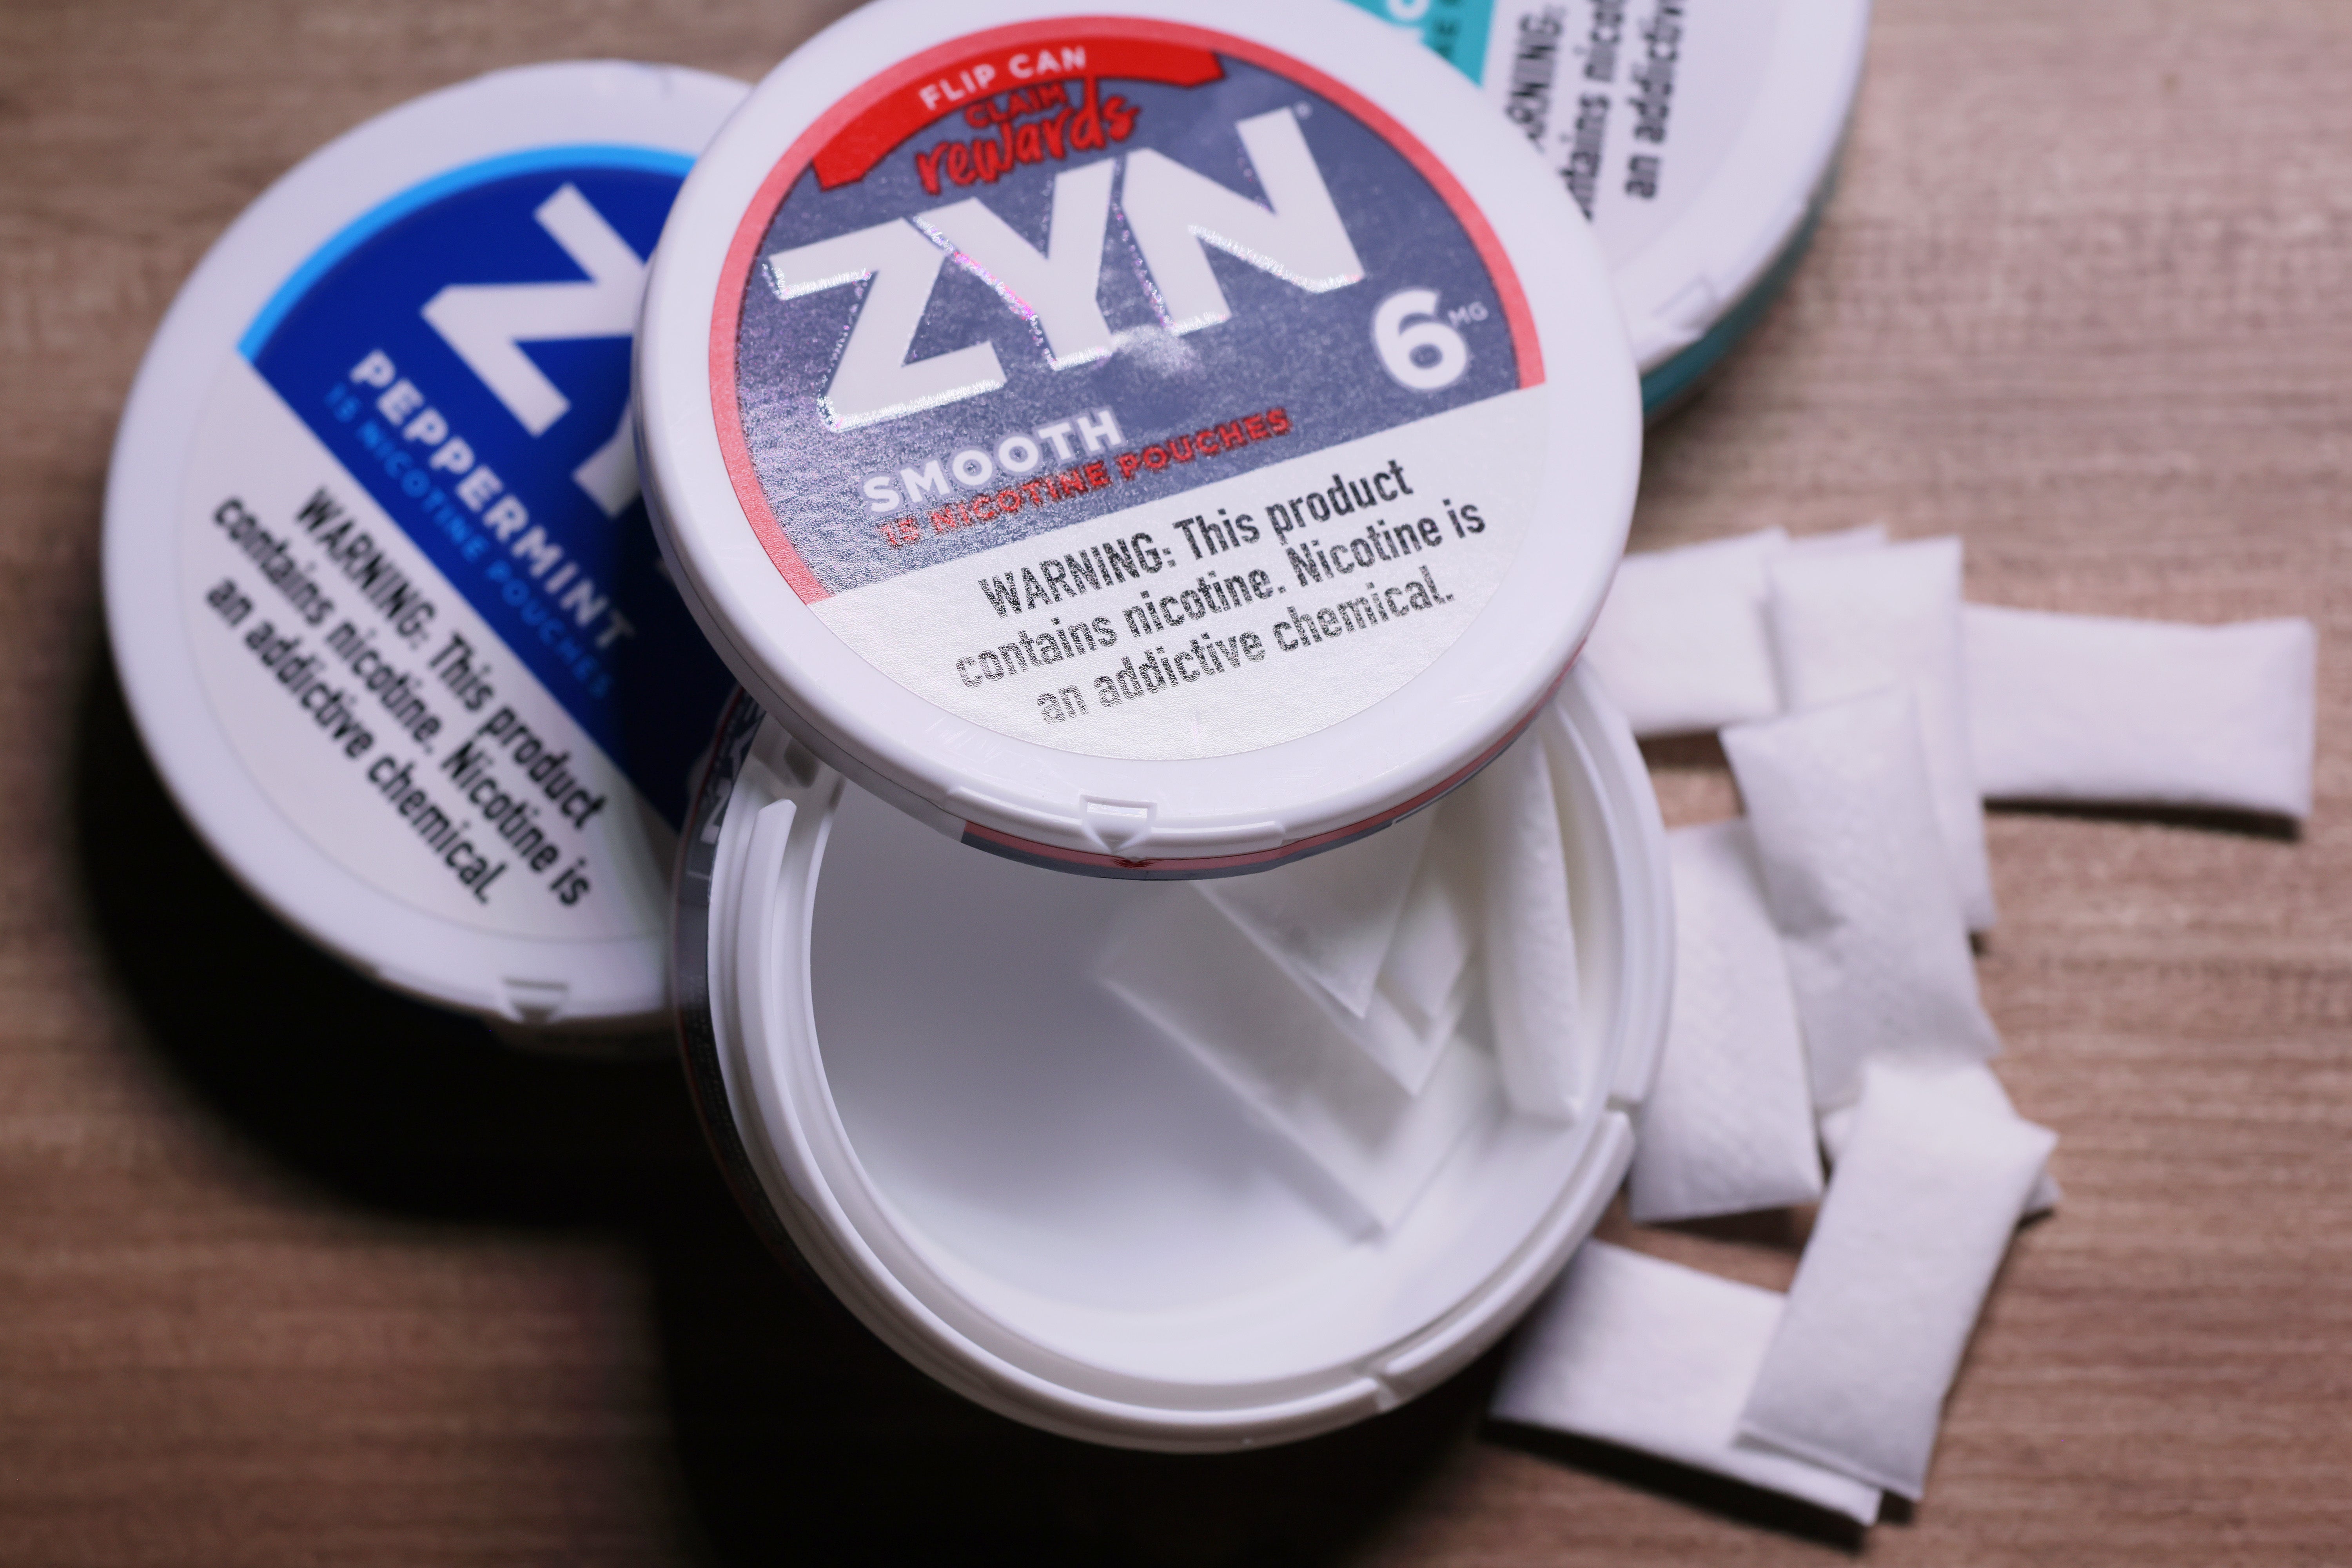 Phillip Morris announced online sales are stopping on Zyn.com as the company faces a subpoena from the Washington, DC, attorney general